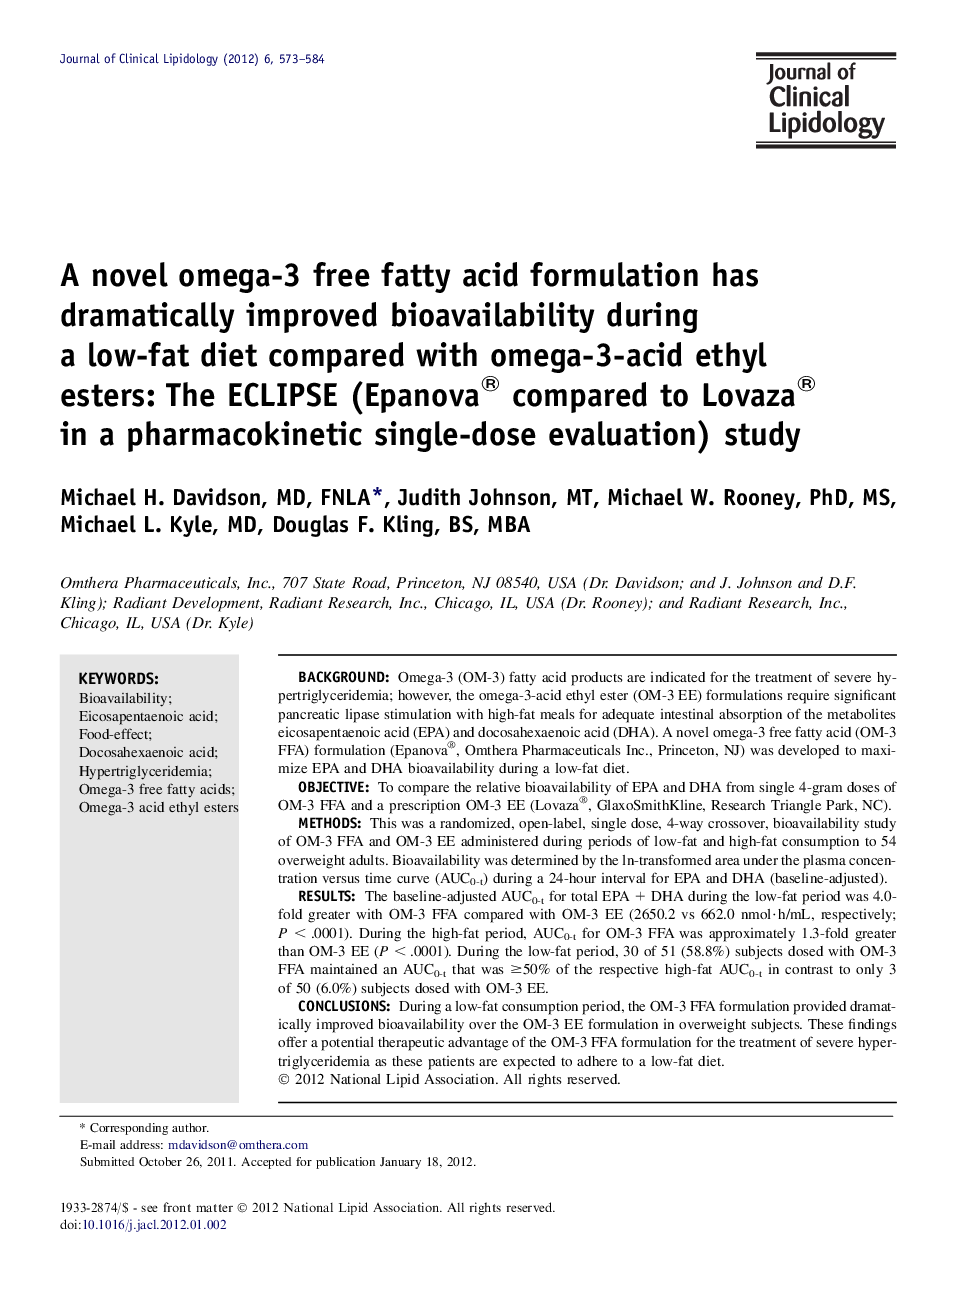 A novel omega-3 free fatty acid formulation has dramatically improved bioavailability during a low-fat diet compared with omega-3-acid ethyl esters: The ECLIPSE (Epanova® compared to Lovaza® in a pharmacokinetic single-dose evaluation) study